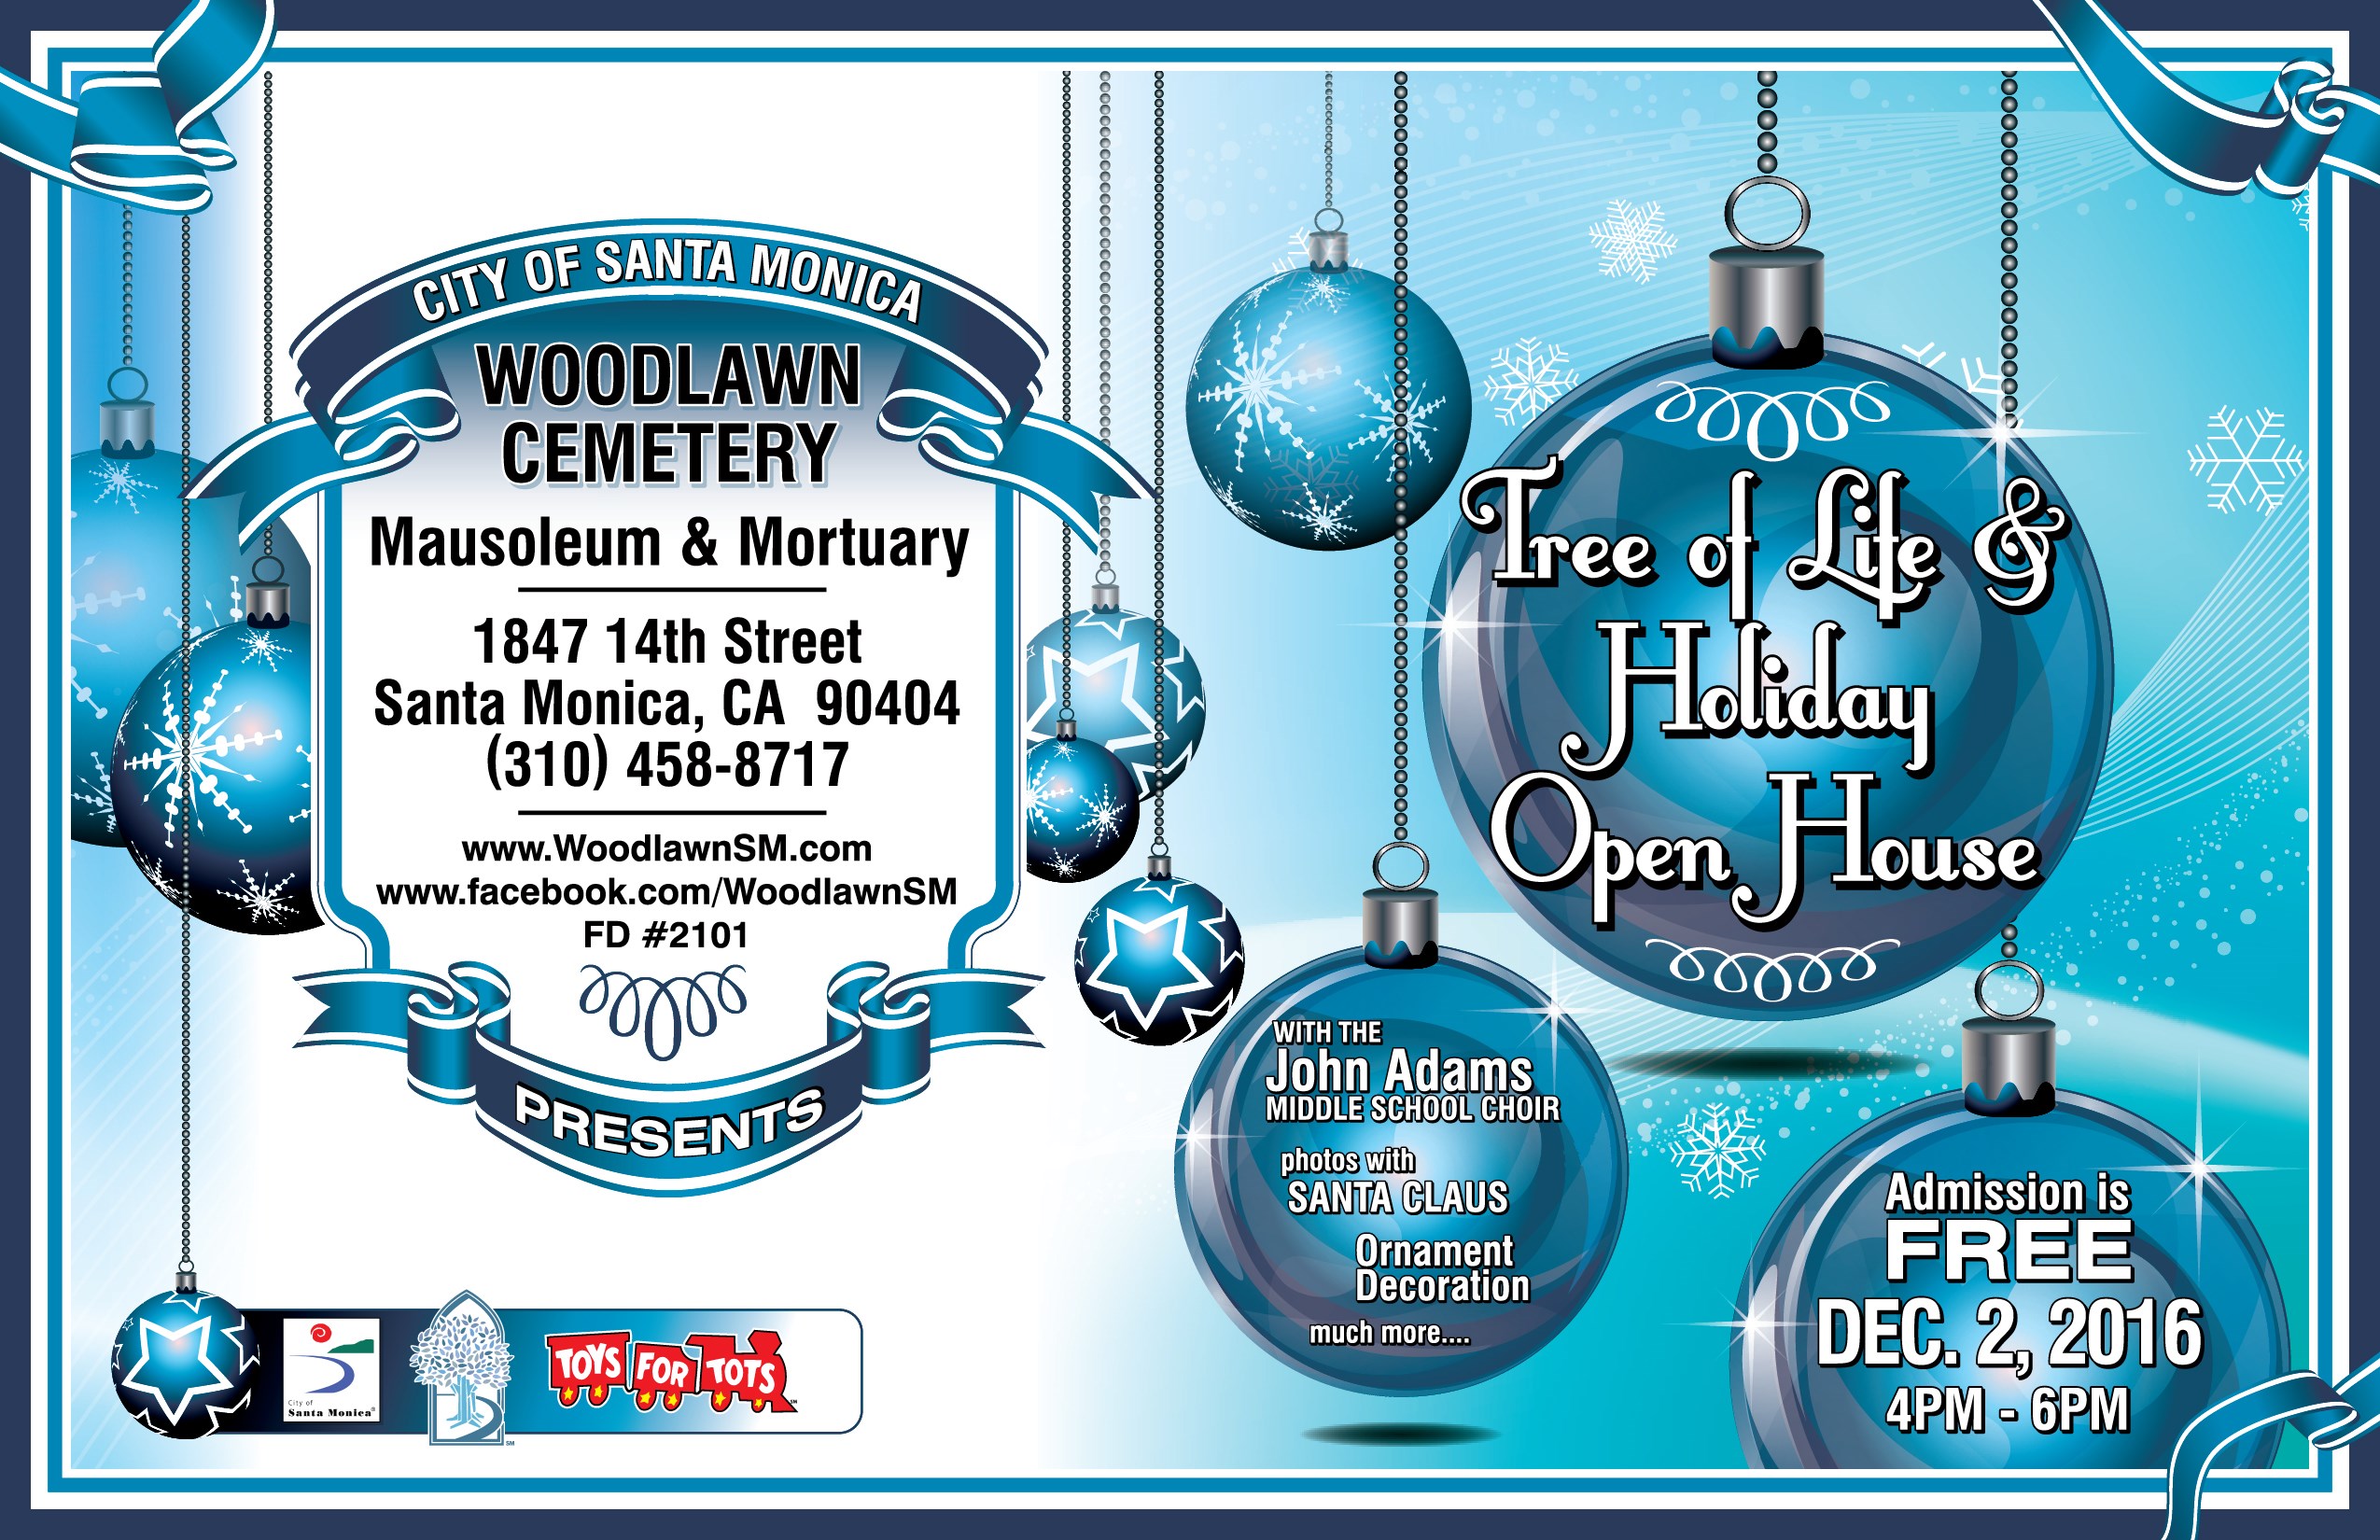 Tree of Life & Holiday Open House at Woodlawn Cemetery